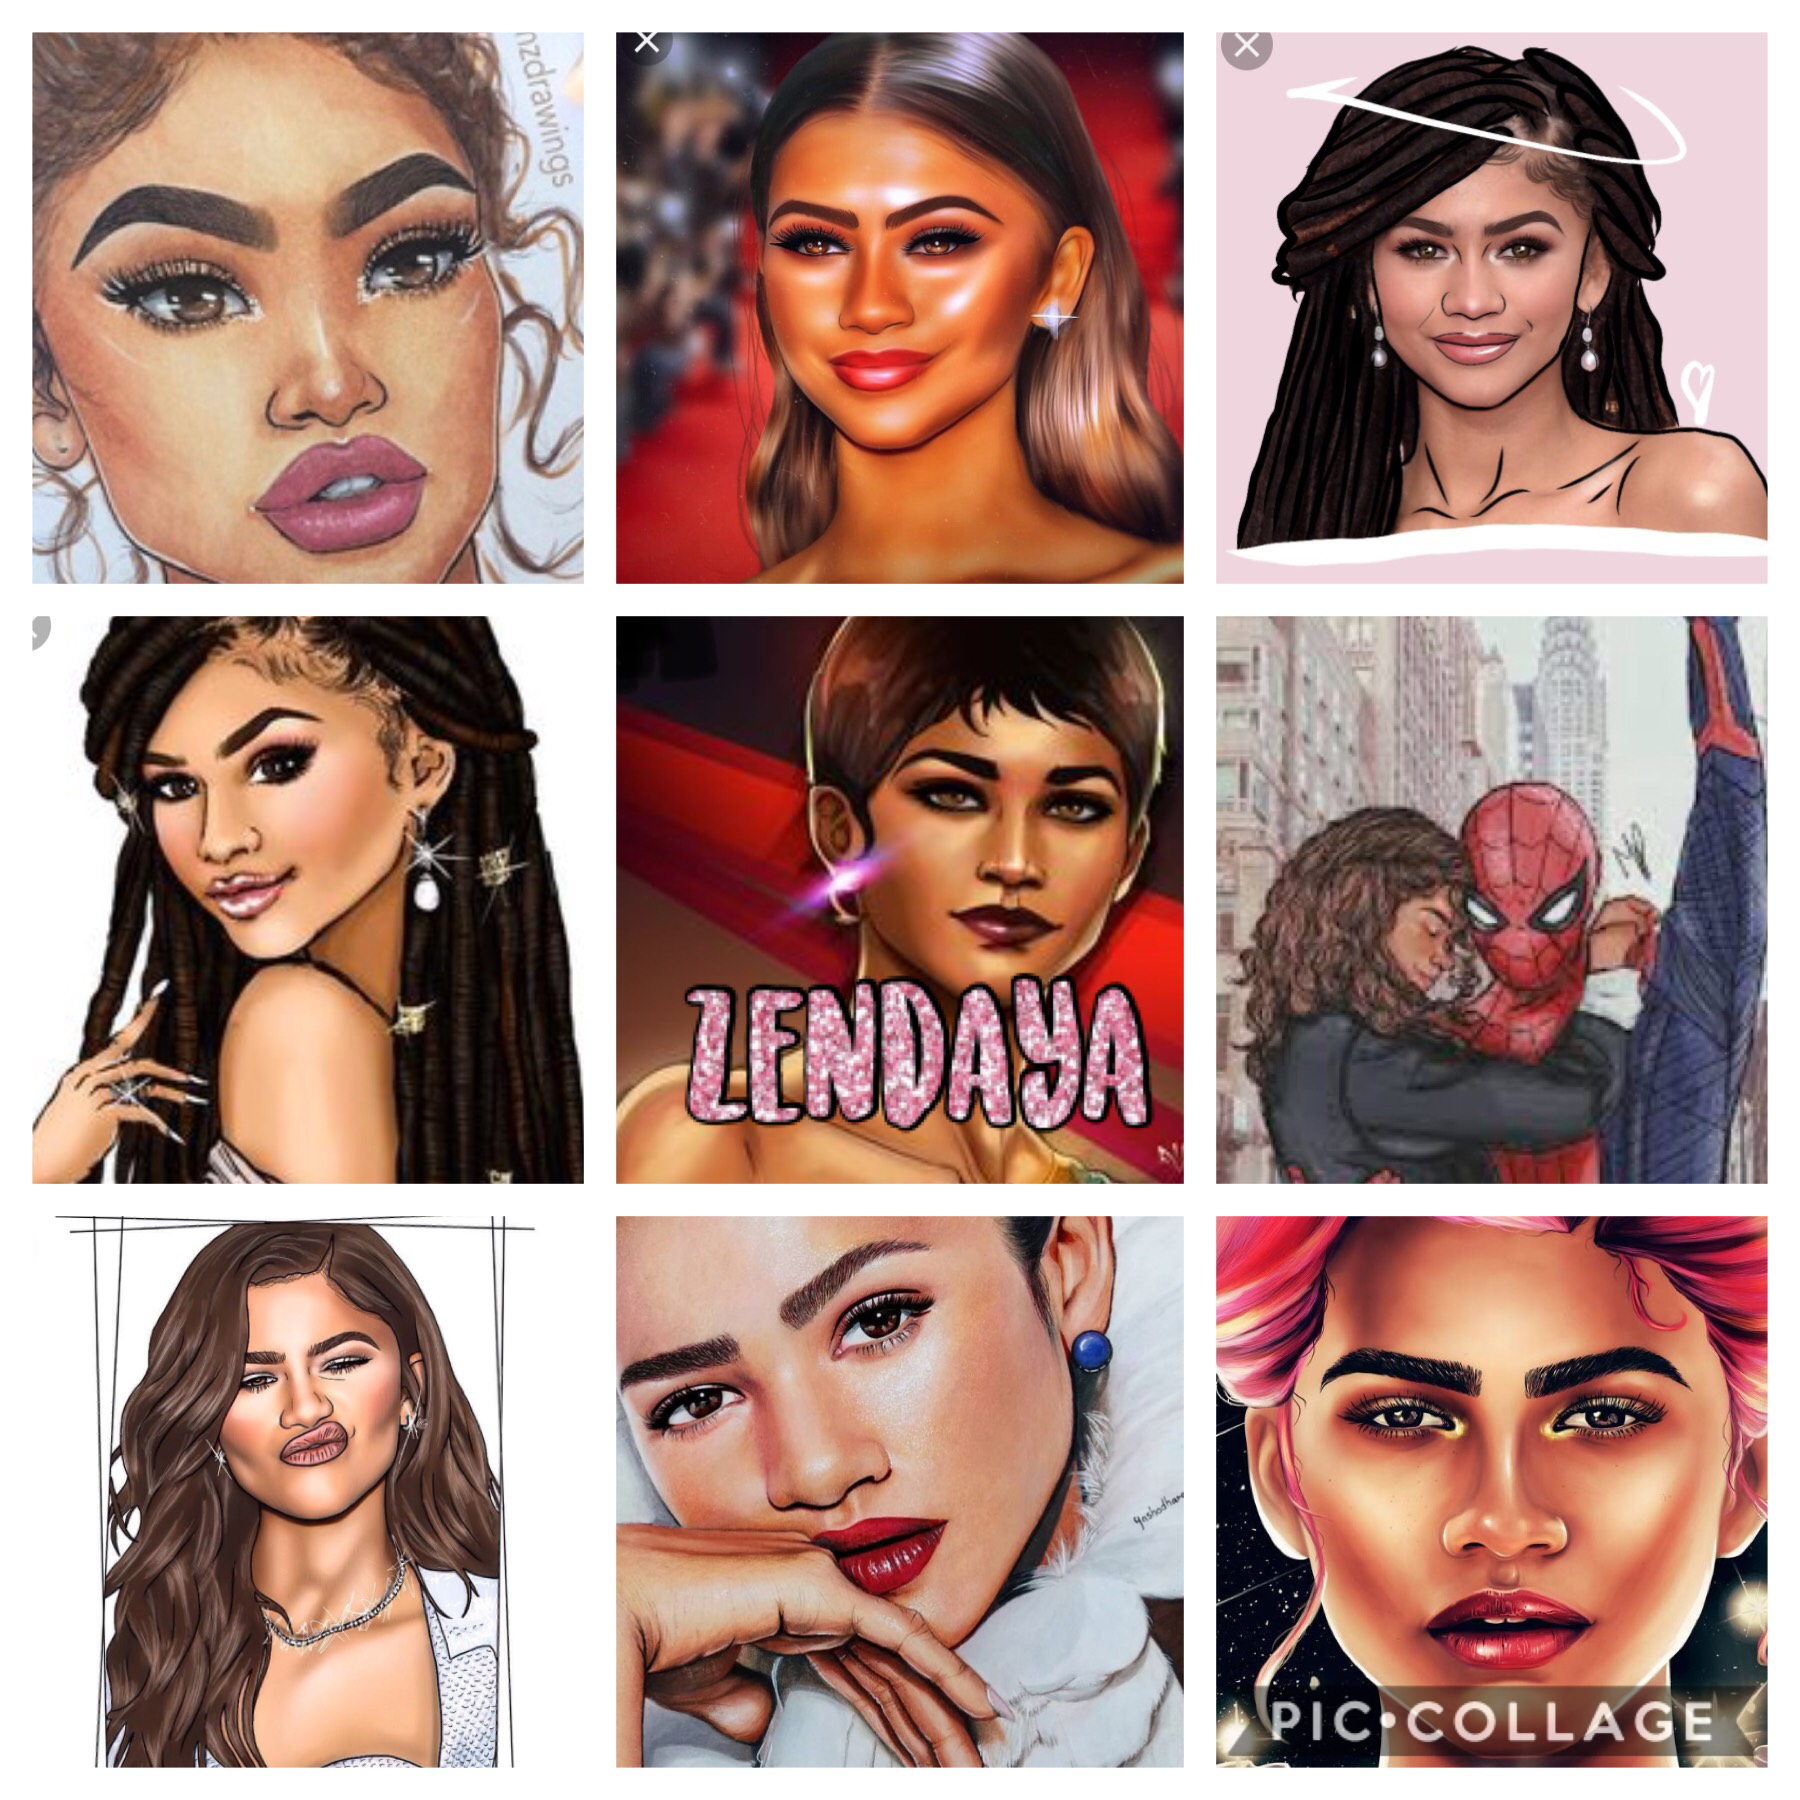 I love Zendaya . She is a proud independent hard working girl and I want to be just like her. Well guys give this one a like if you like or love Zendaya like I do bye y’all peace.